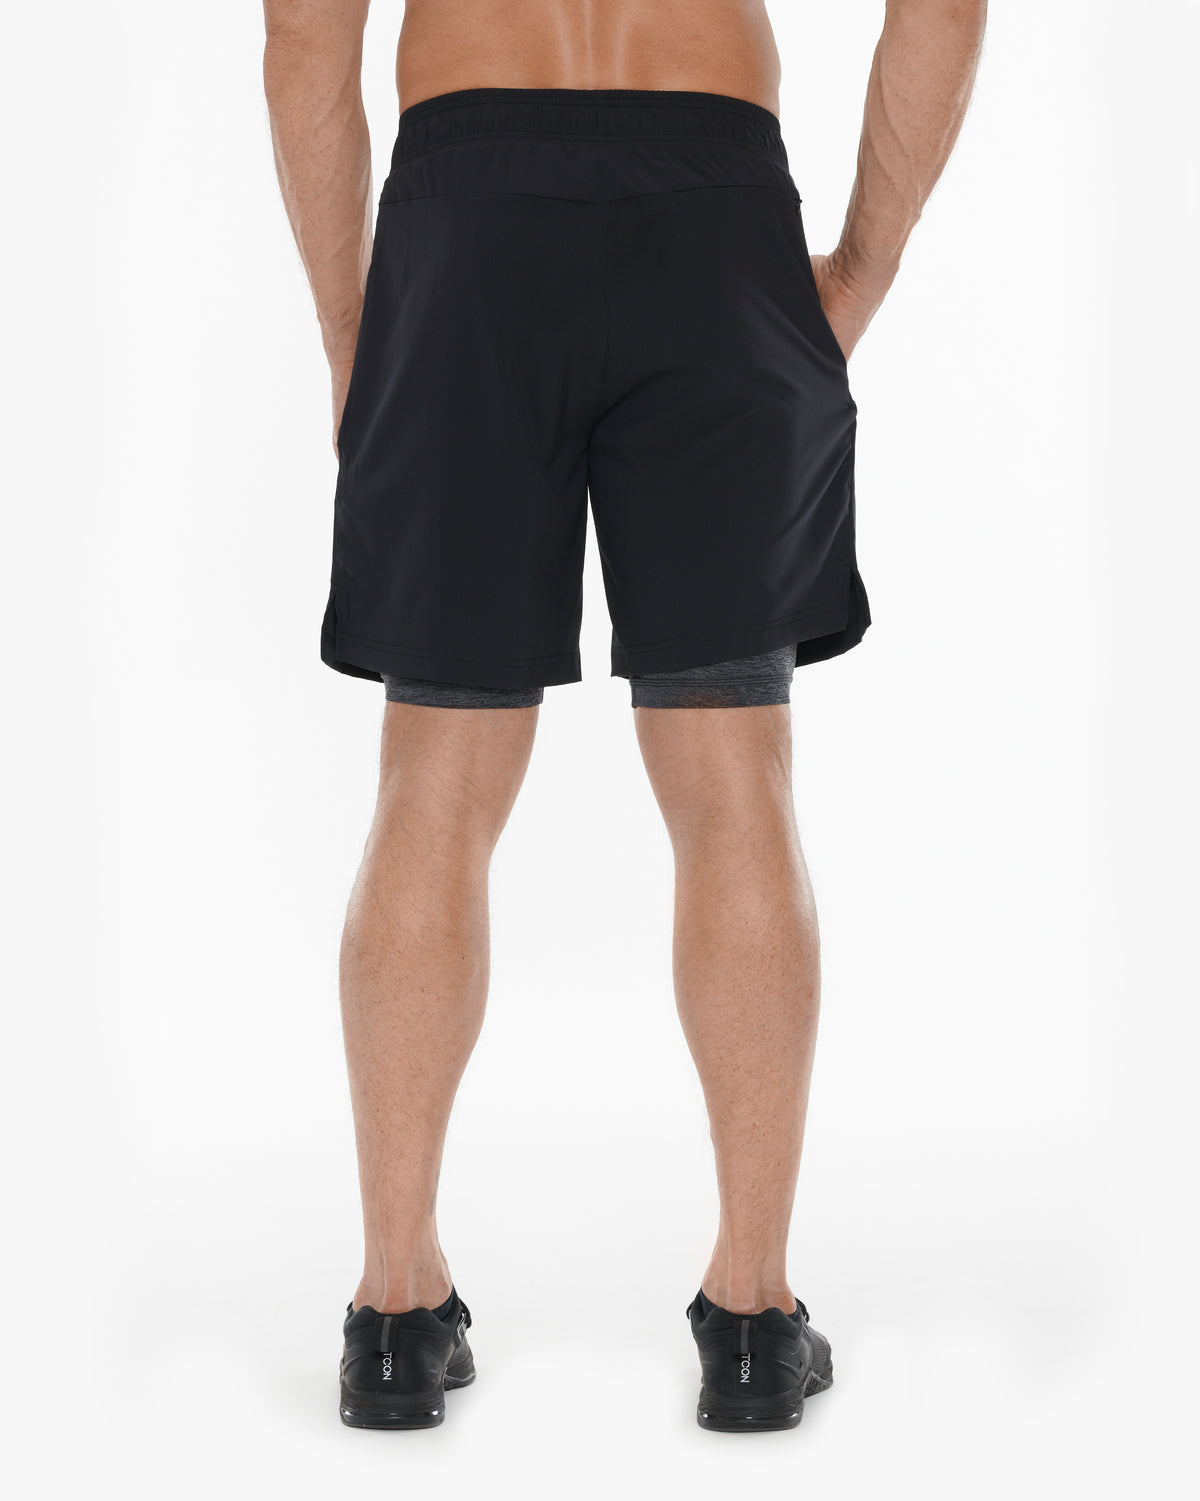 ALO YOGA UNITY 2 IN 1 SHORT 7" - LINED